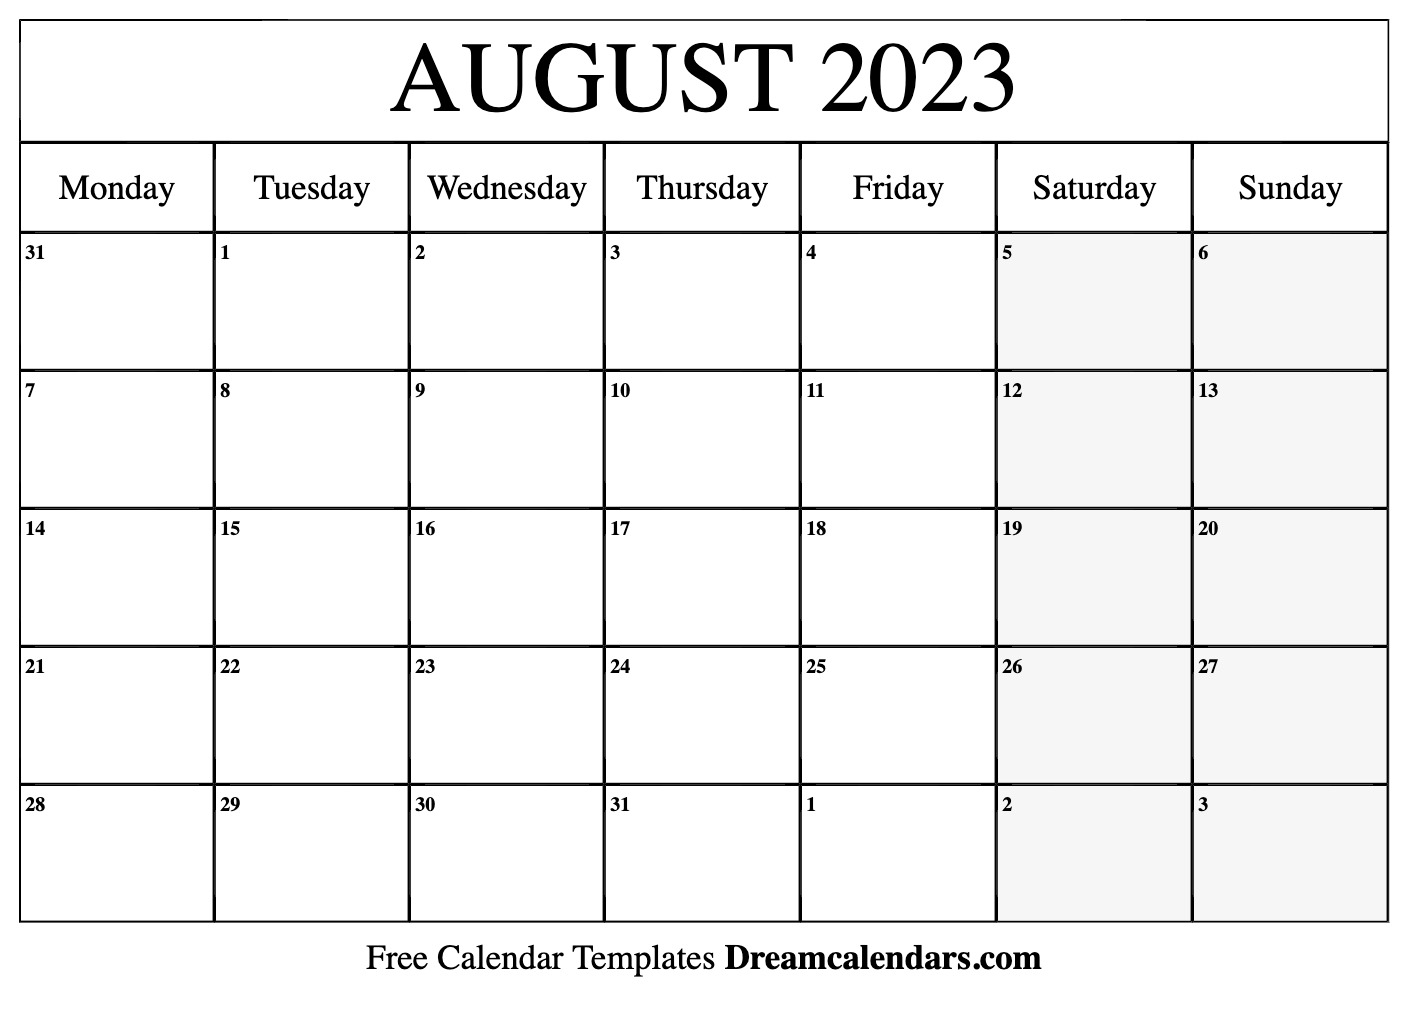 august-2023-calendar-free-blank-printable-with-holidays